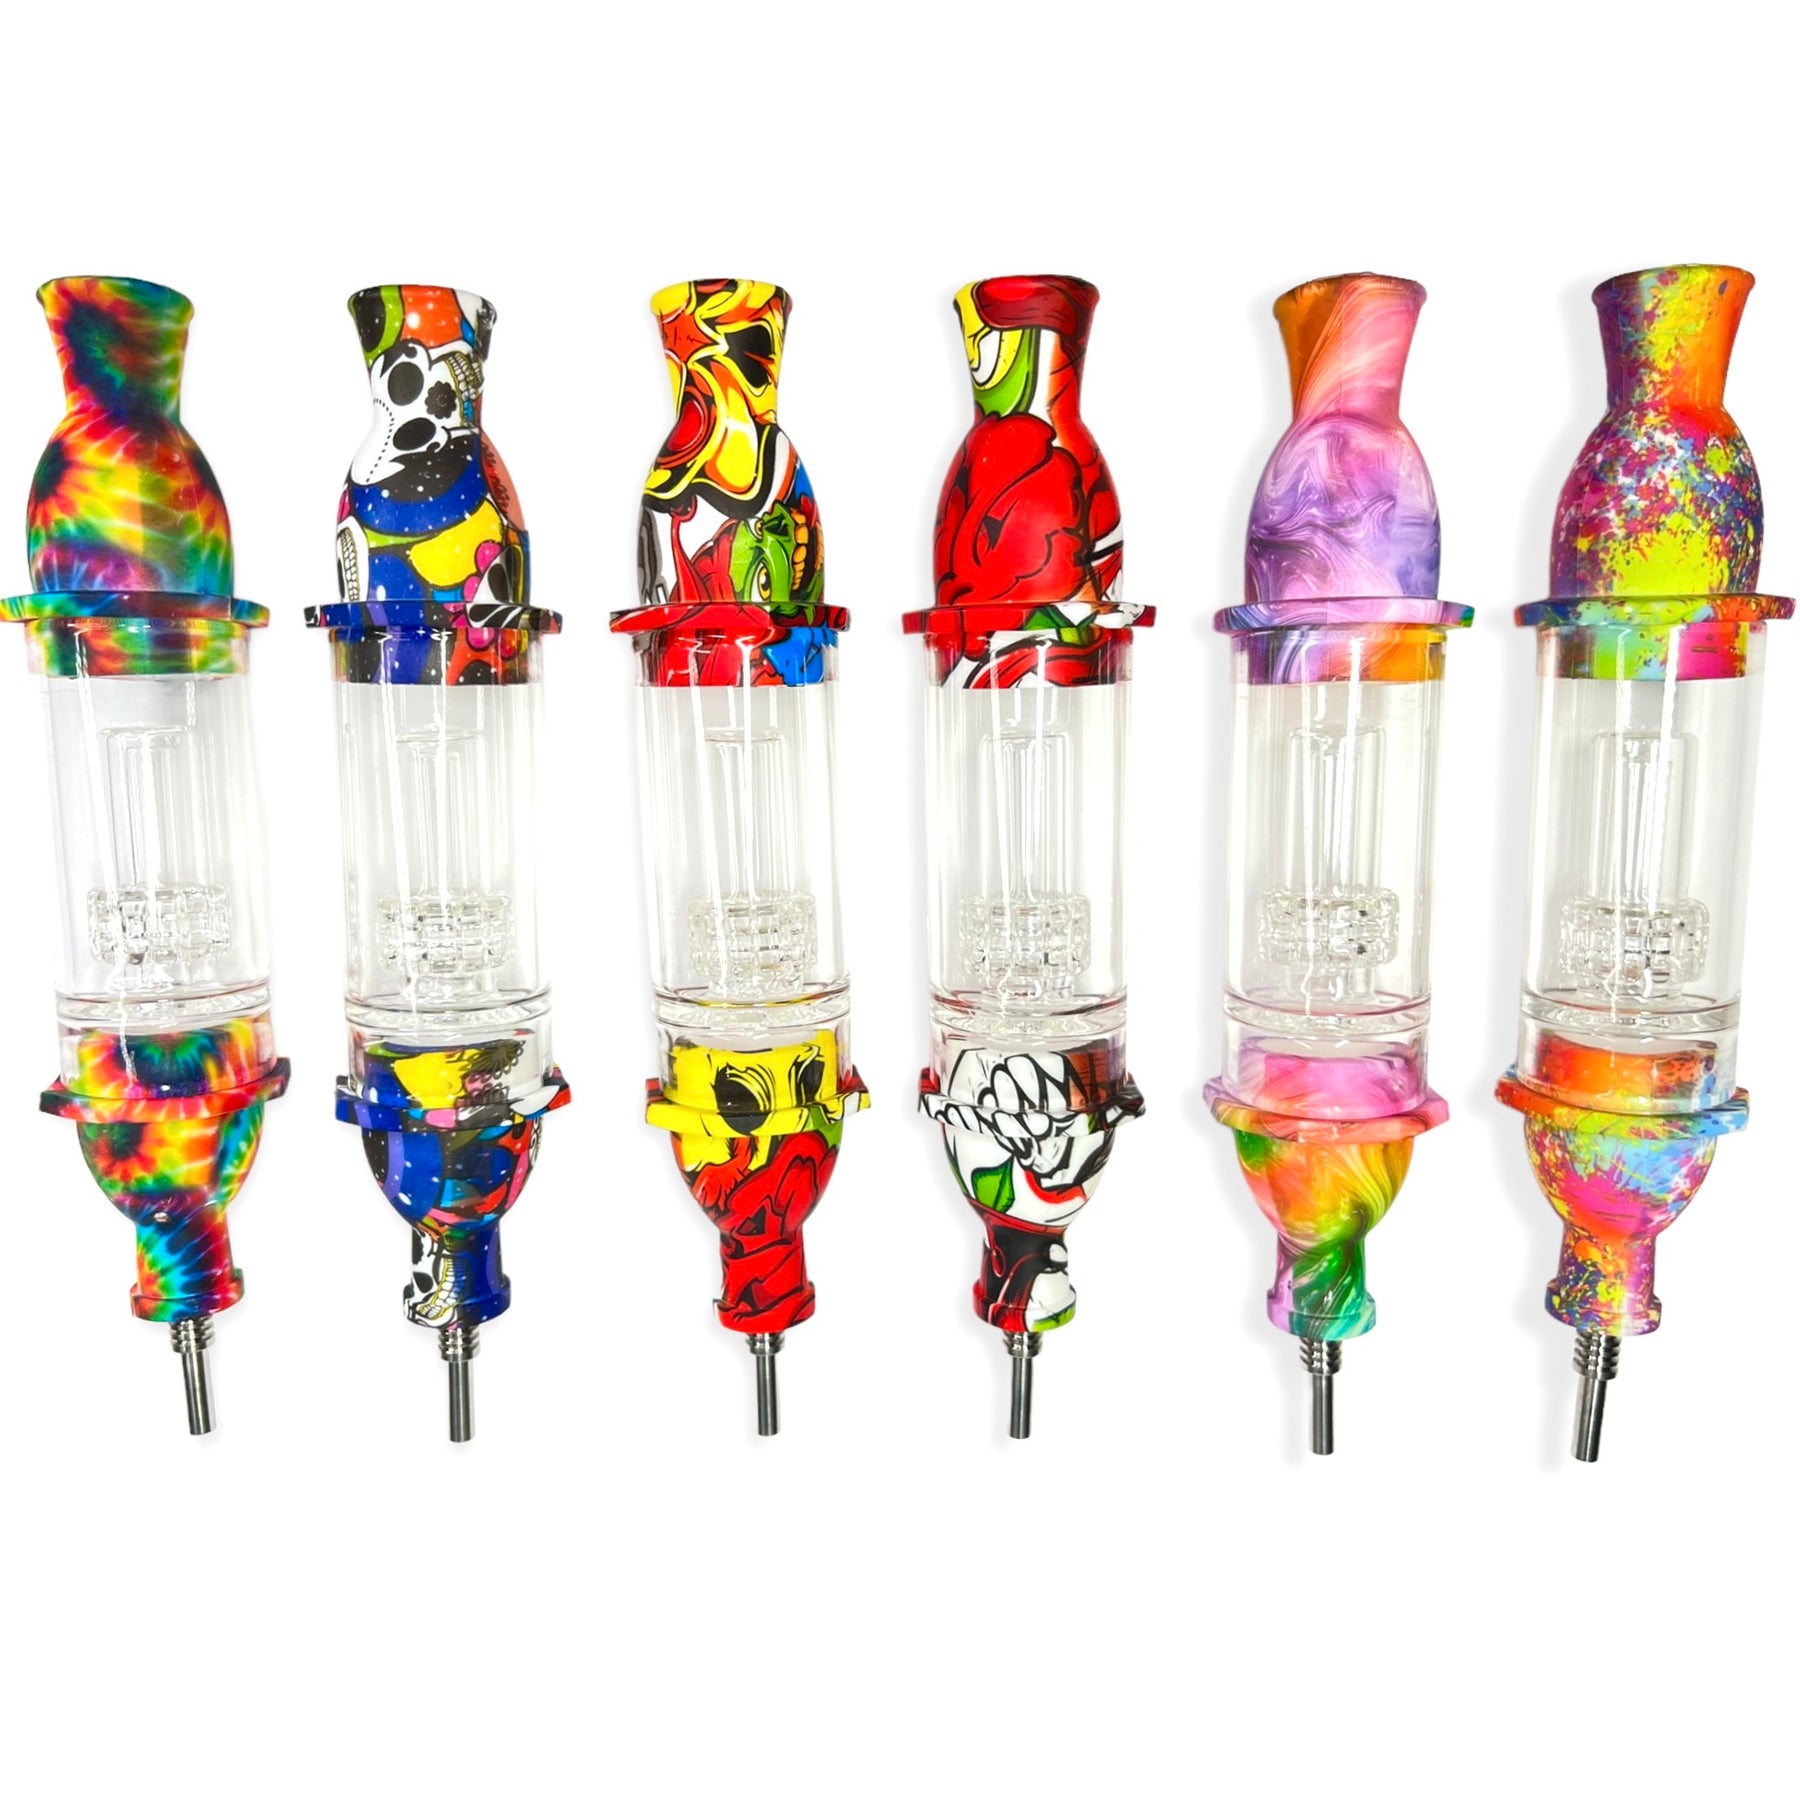 Silicone Glass Nectar Collector Kit with Percolator - Golden Leaf Shop